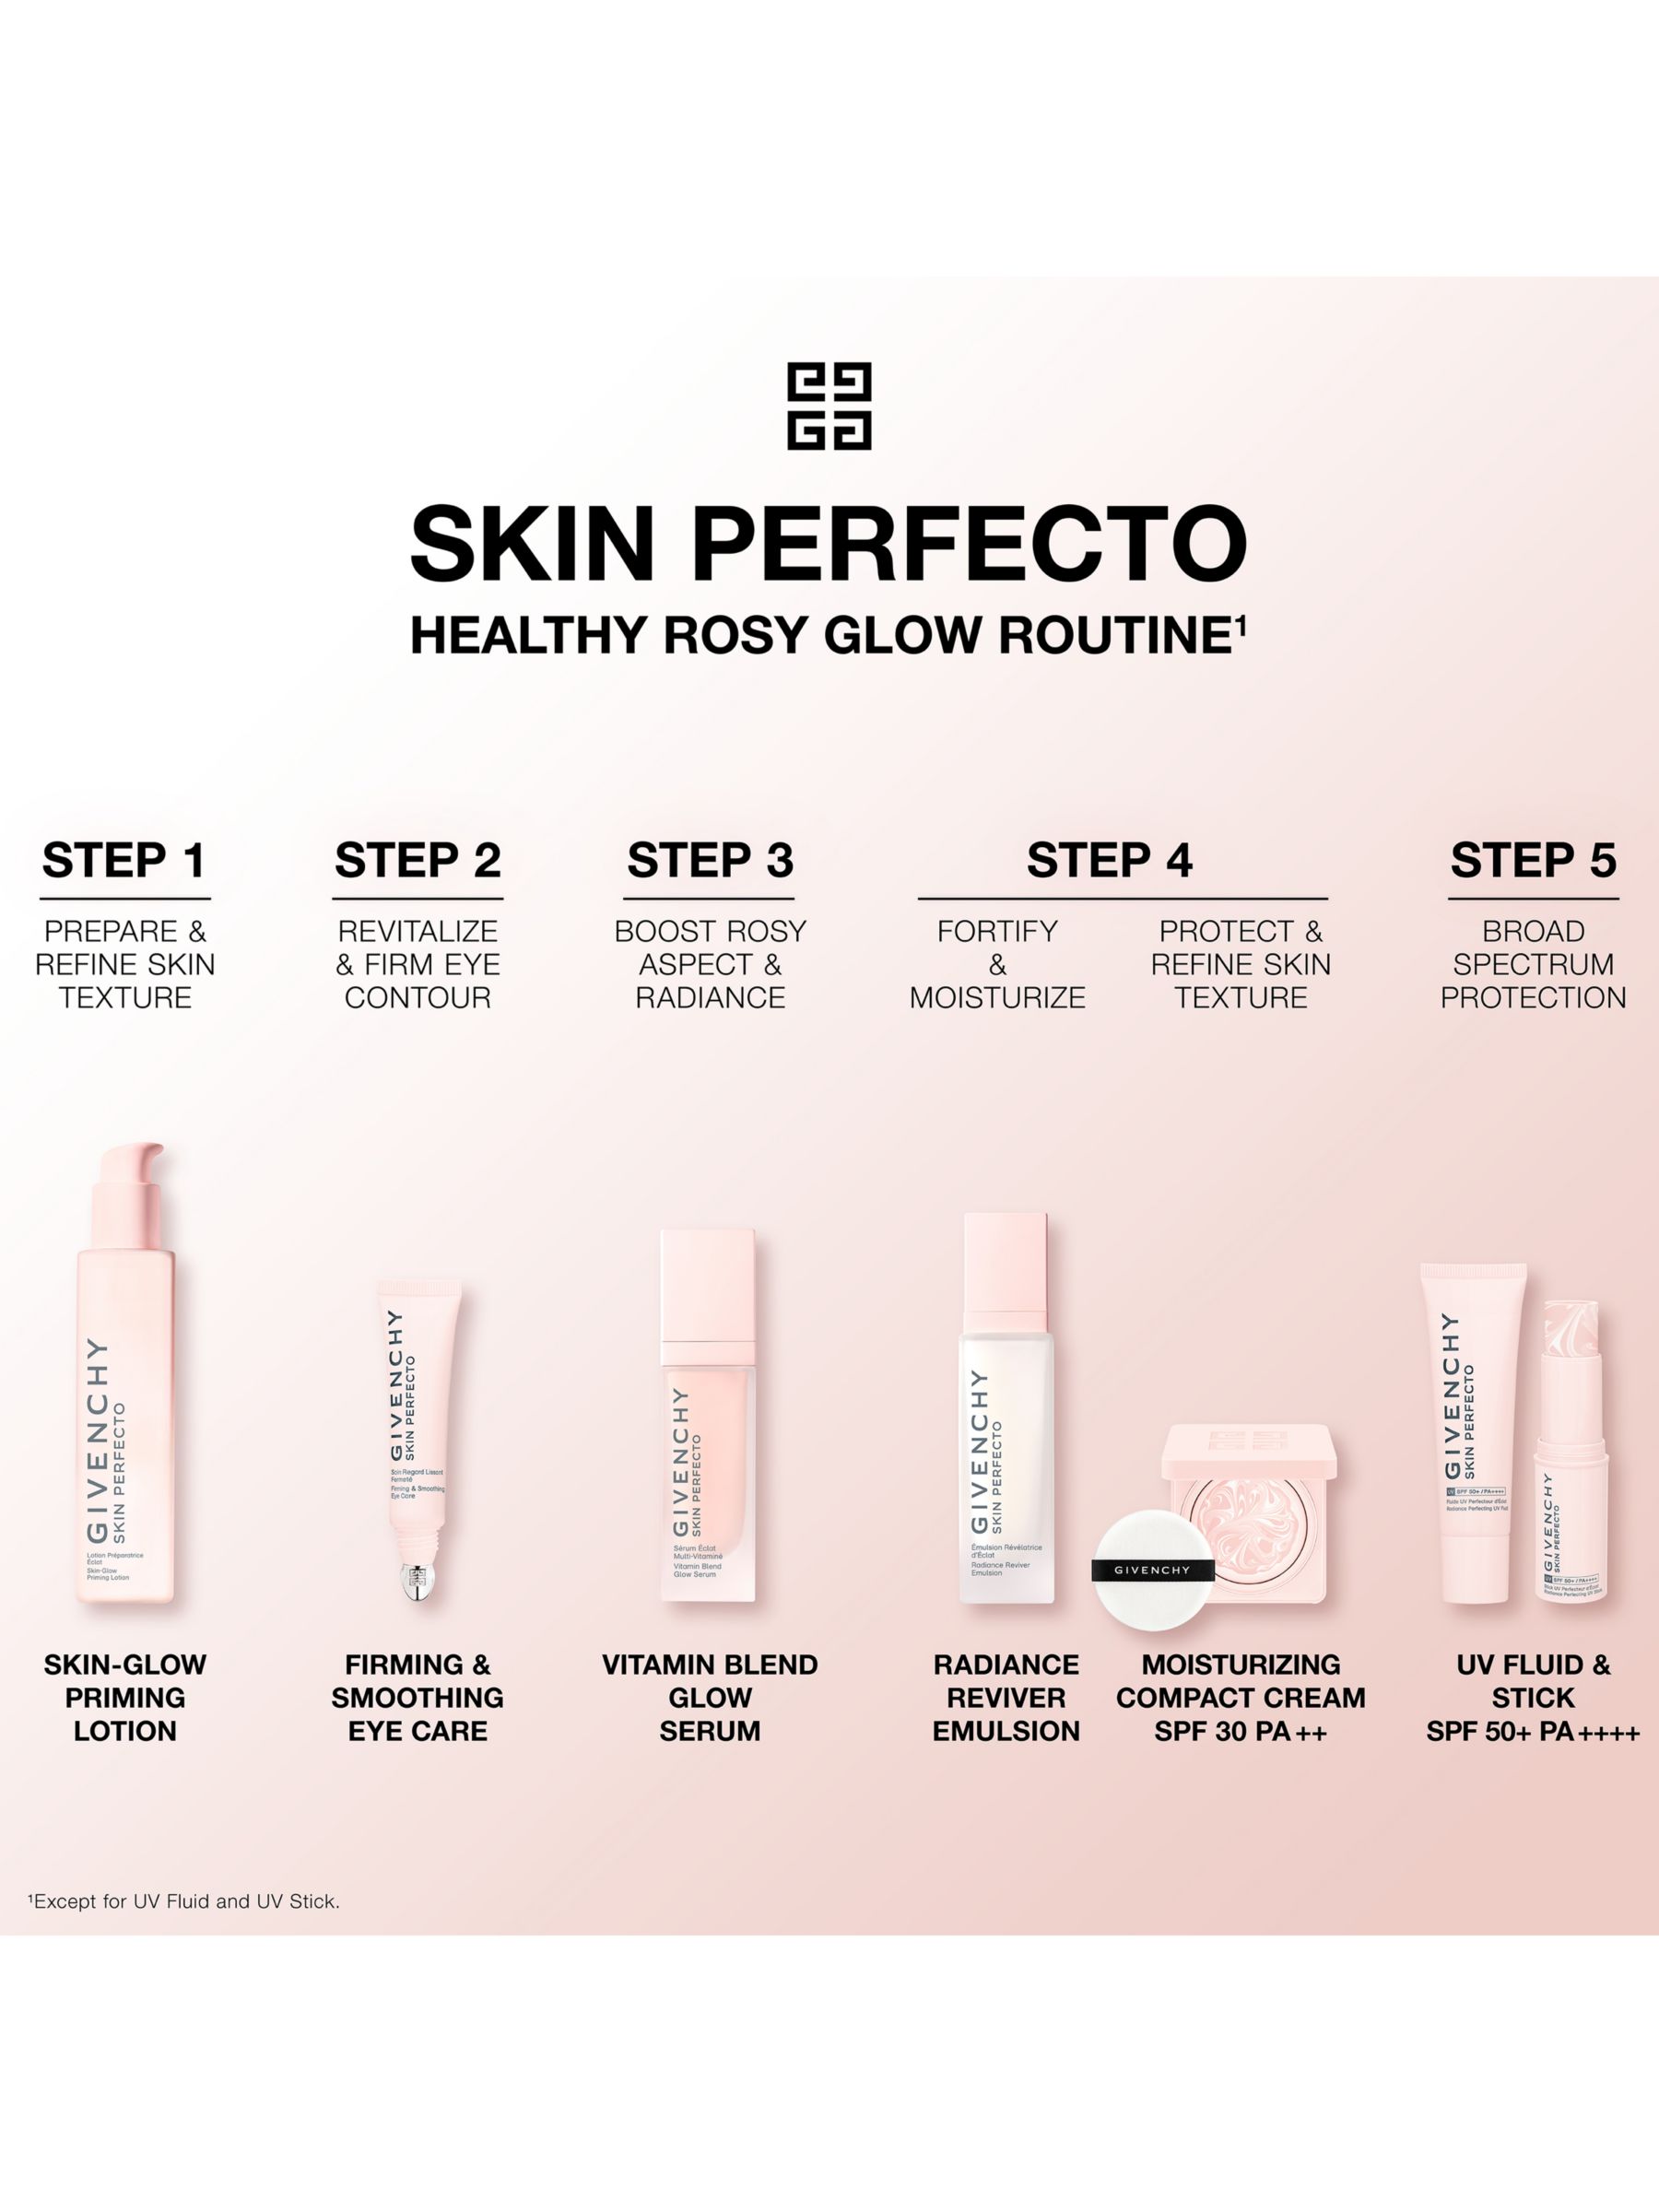 Givenchy Skin Perfecto Radiance Perfecting UV Fluid SPF 50+ PA++++, 30ml 5